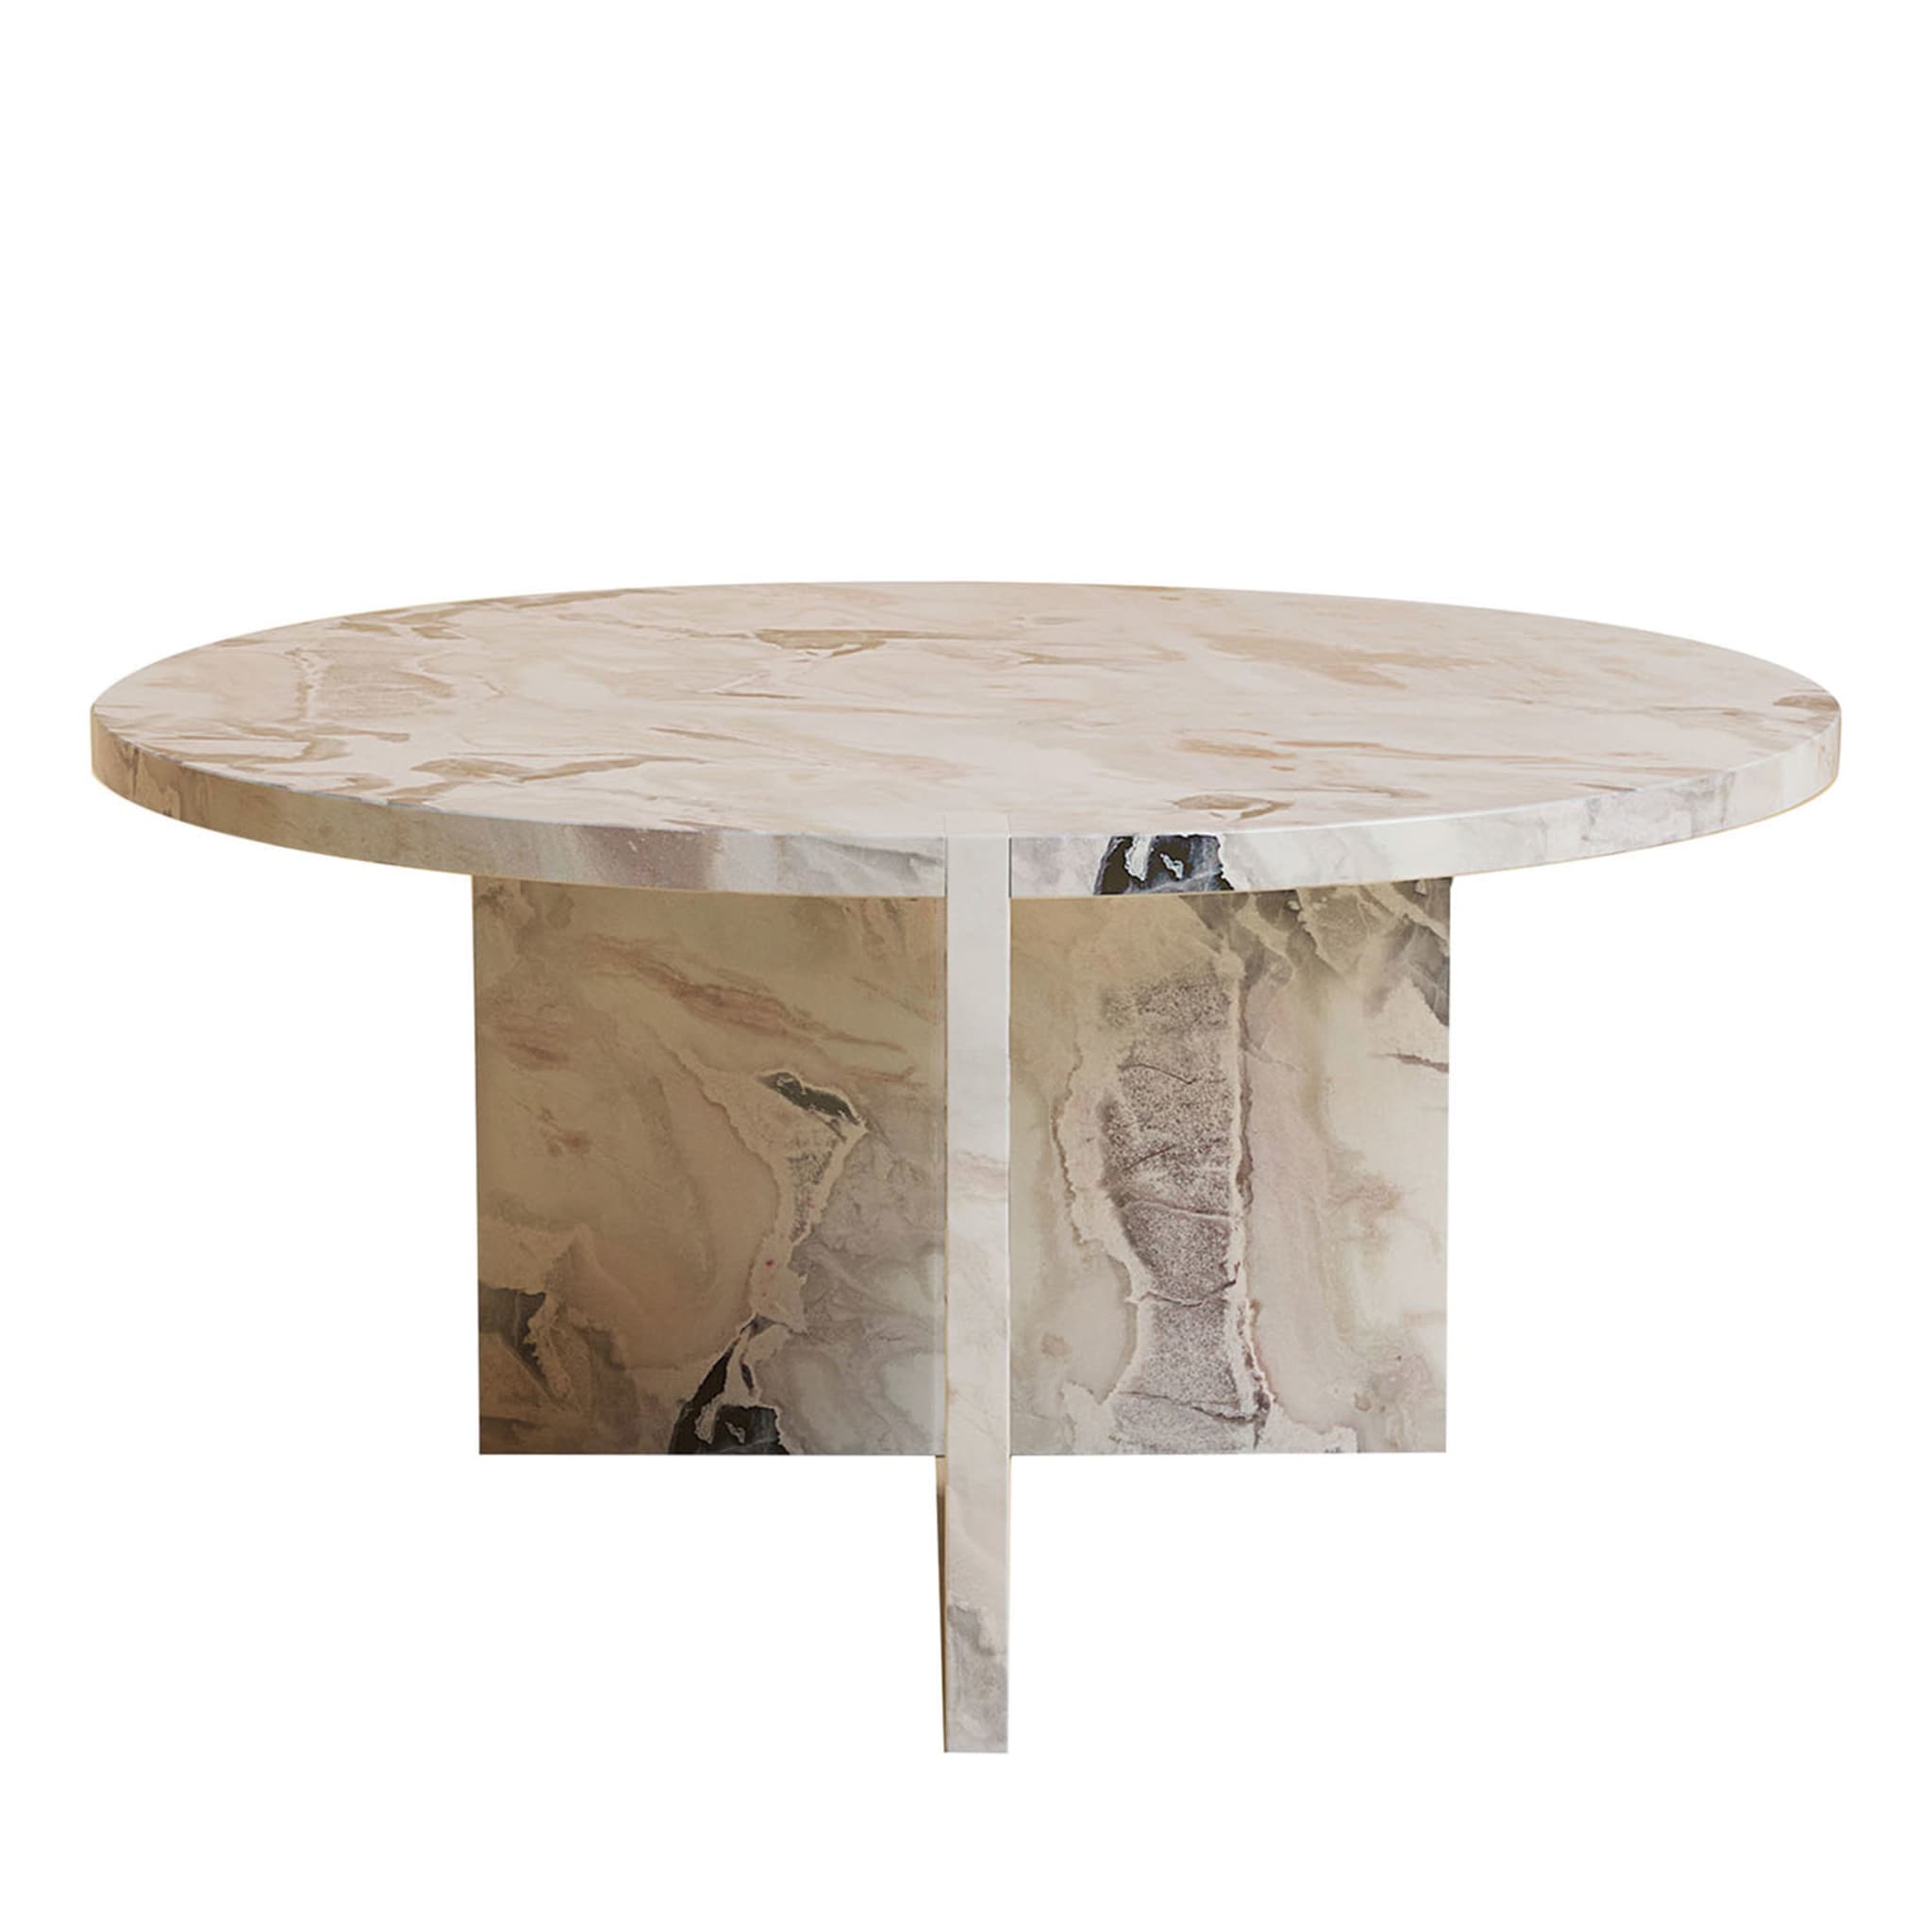 Hashi Dover White Coffee Table - Main view